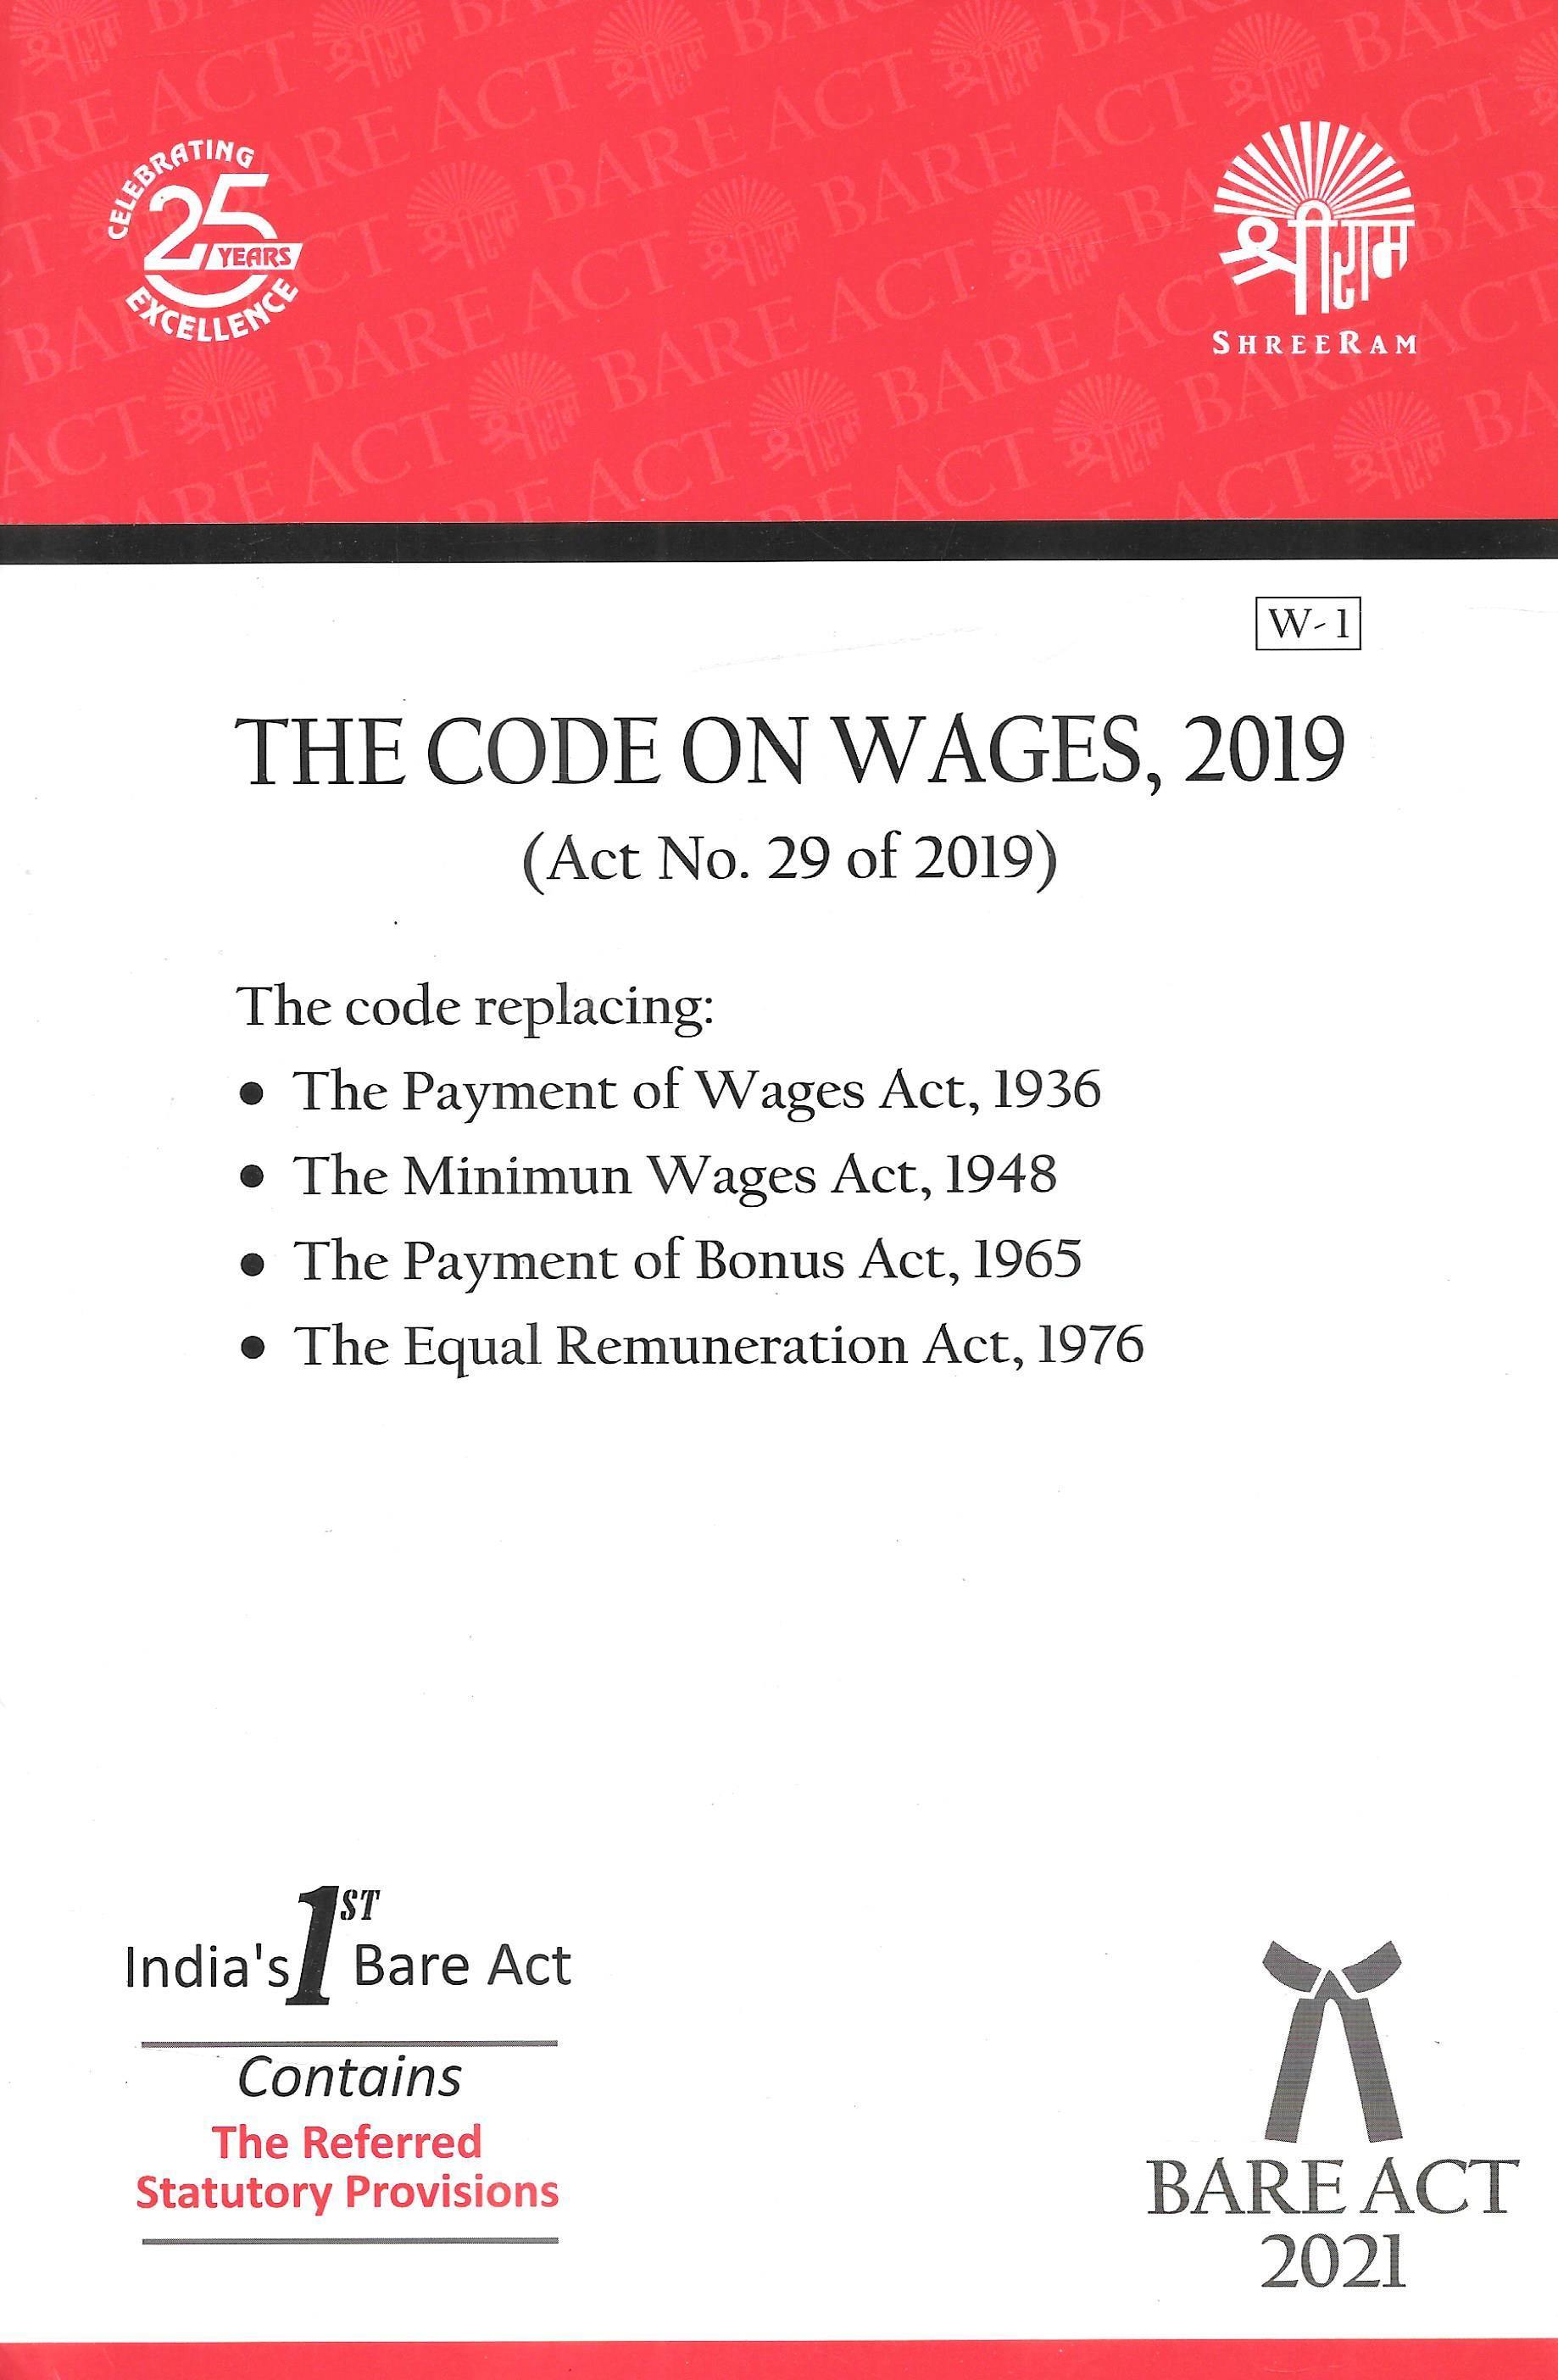 The Code of Wages, 2019 - M&J Services